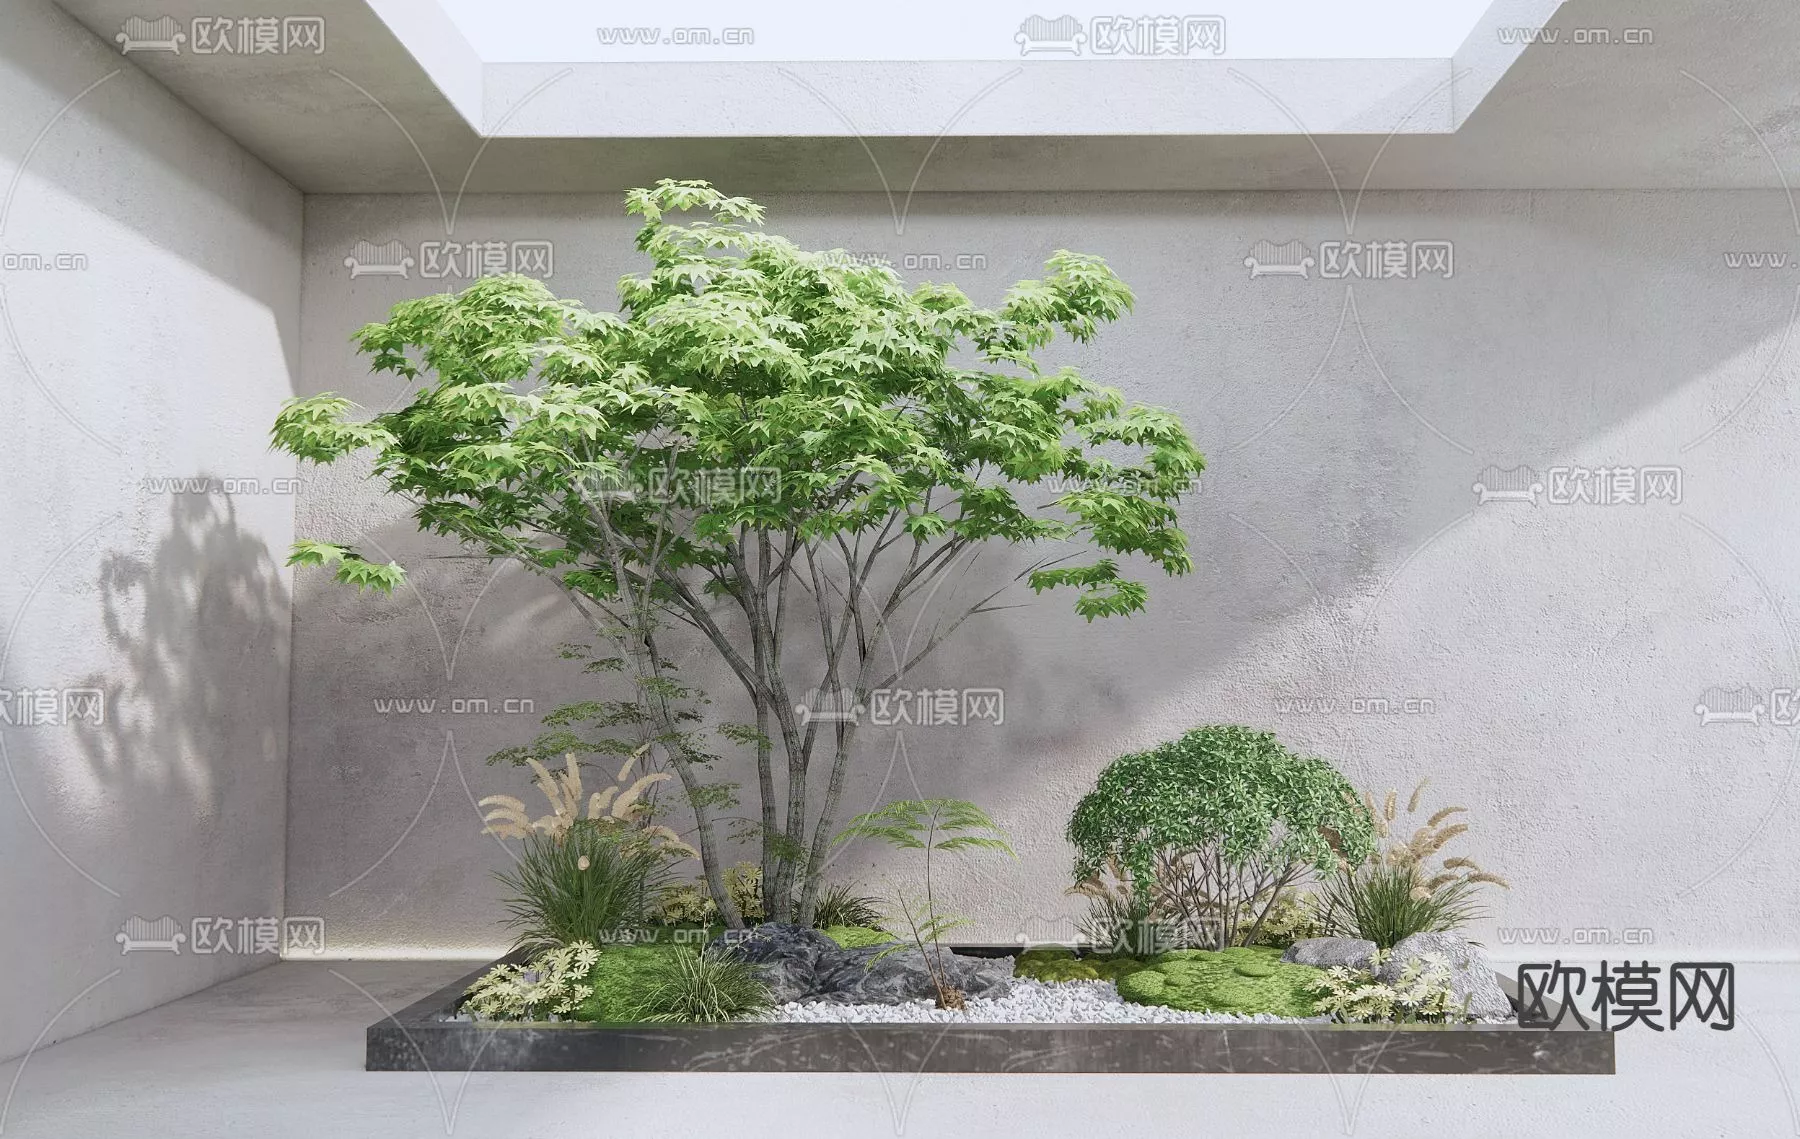 MODERN TREE - SKETCHUP 3D MODEL - VRAY OR ENSCAPE - ID15362